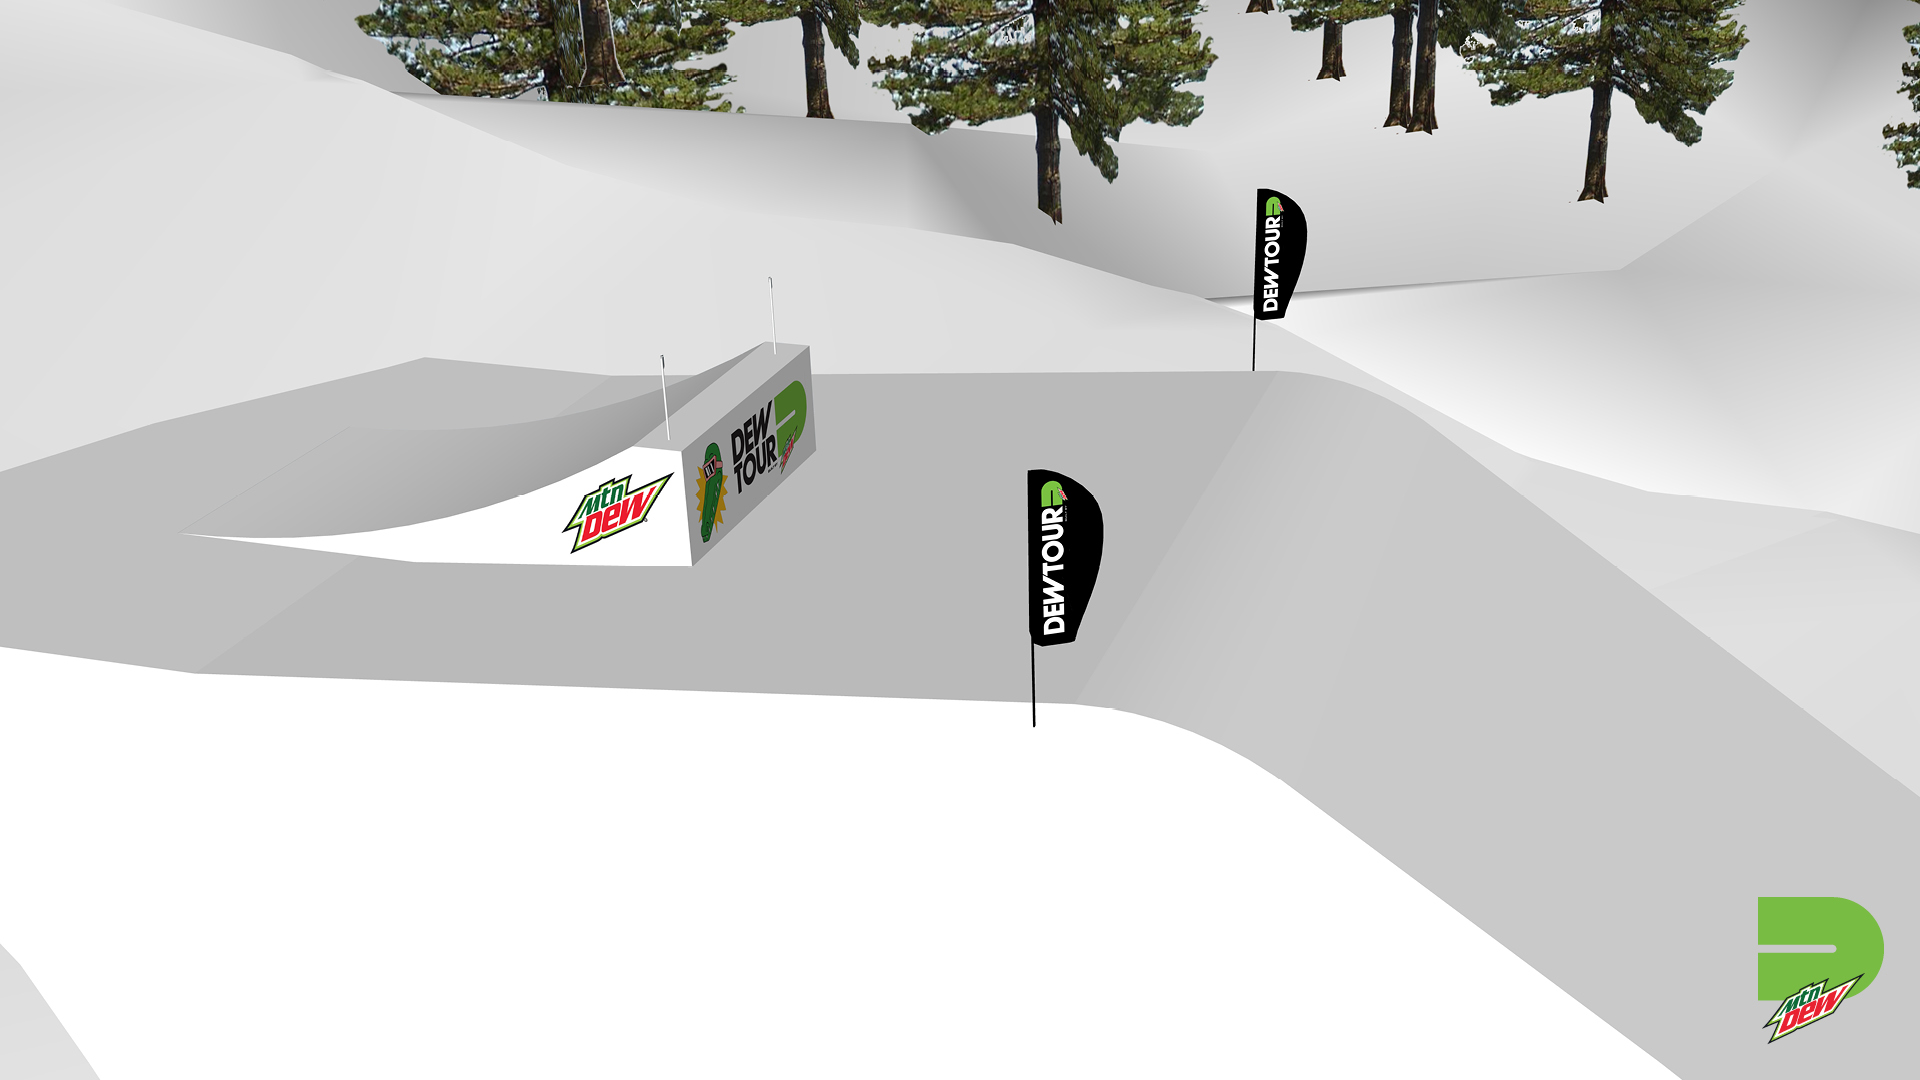 Dt BRECK 18 COURSE FEATURES SLOPE 8